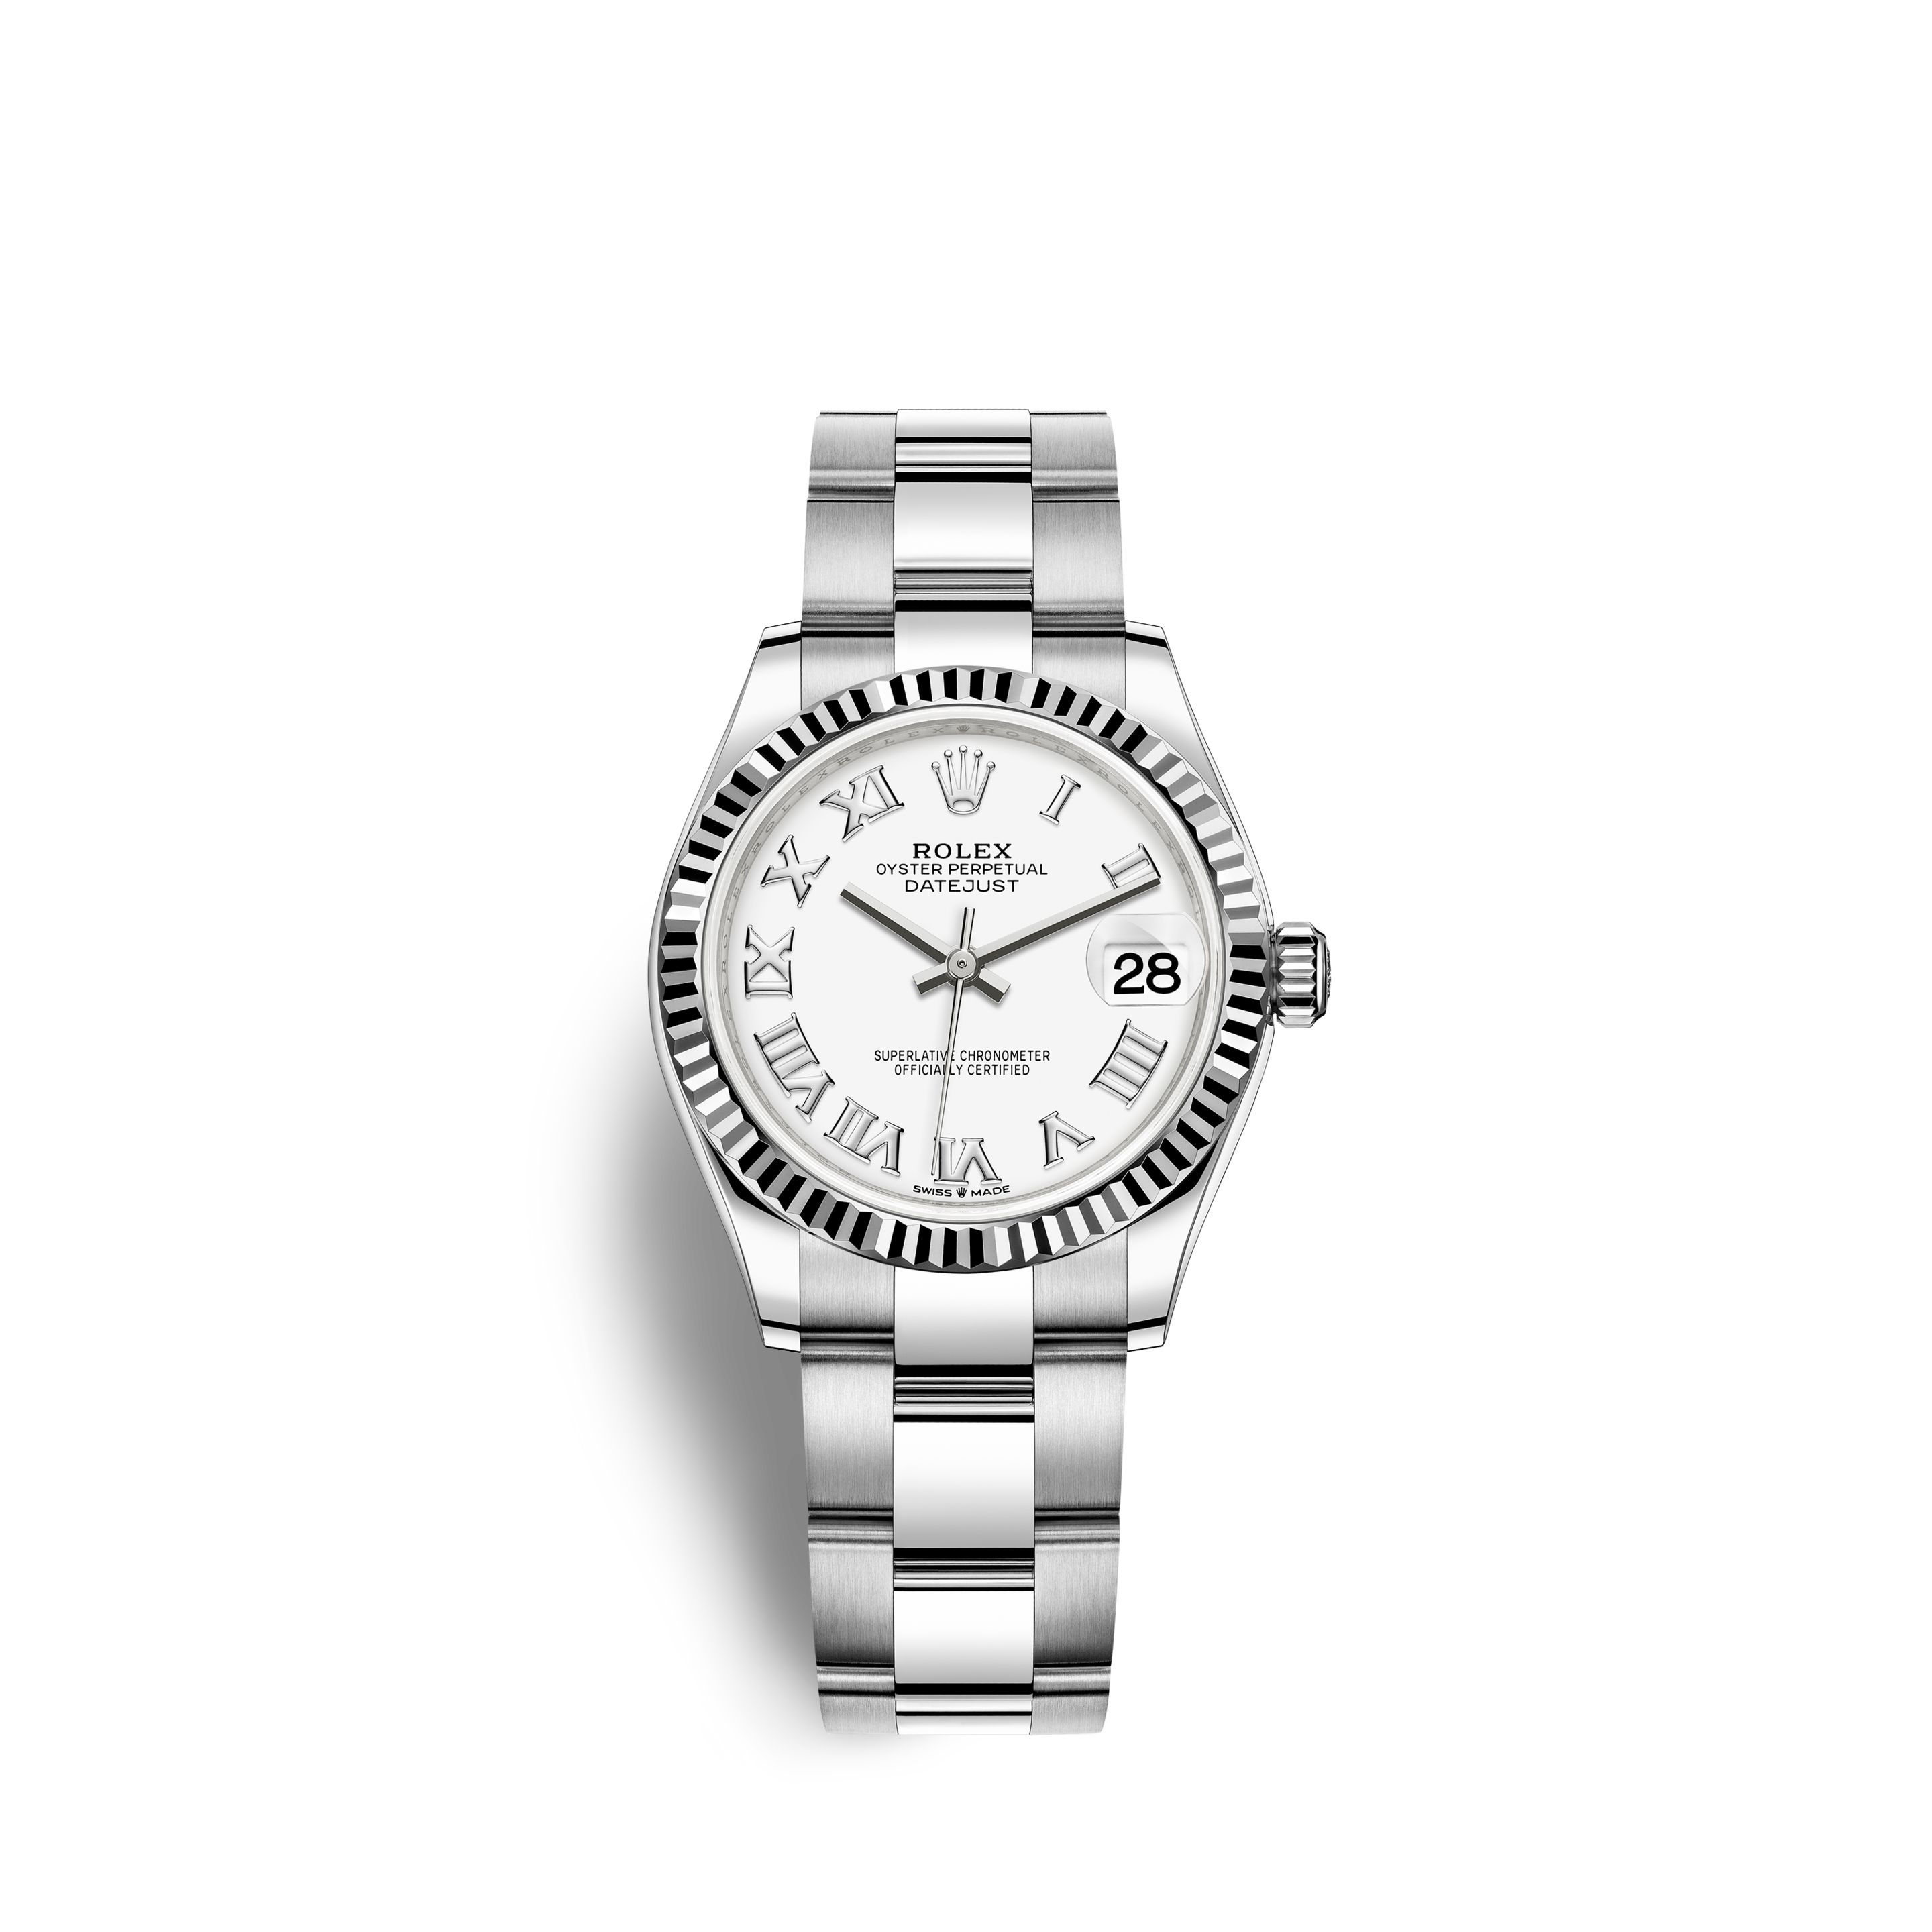 rolex oyster perpetual datejust preis